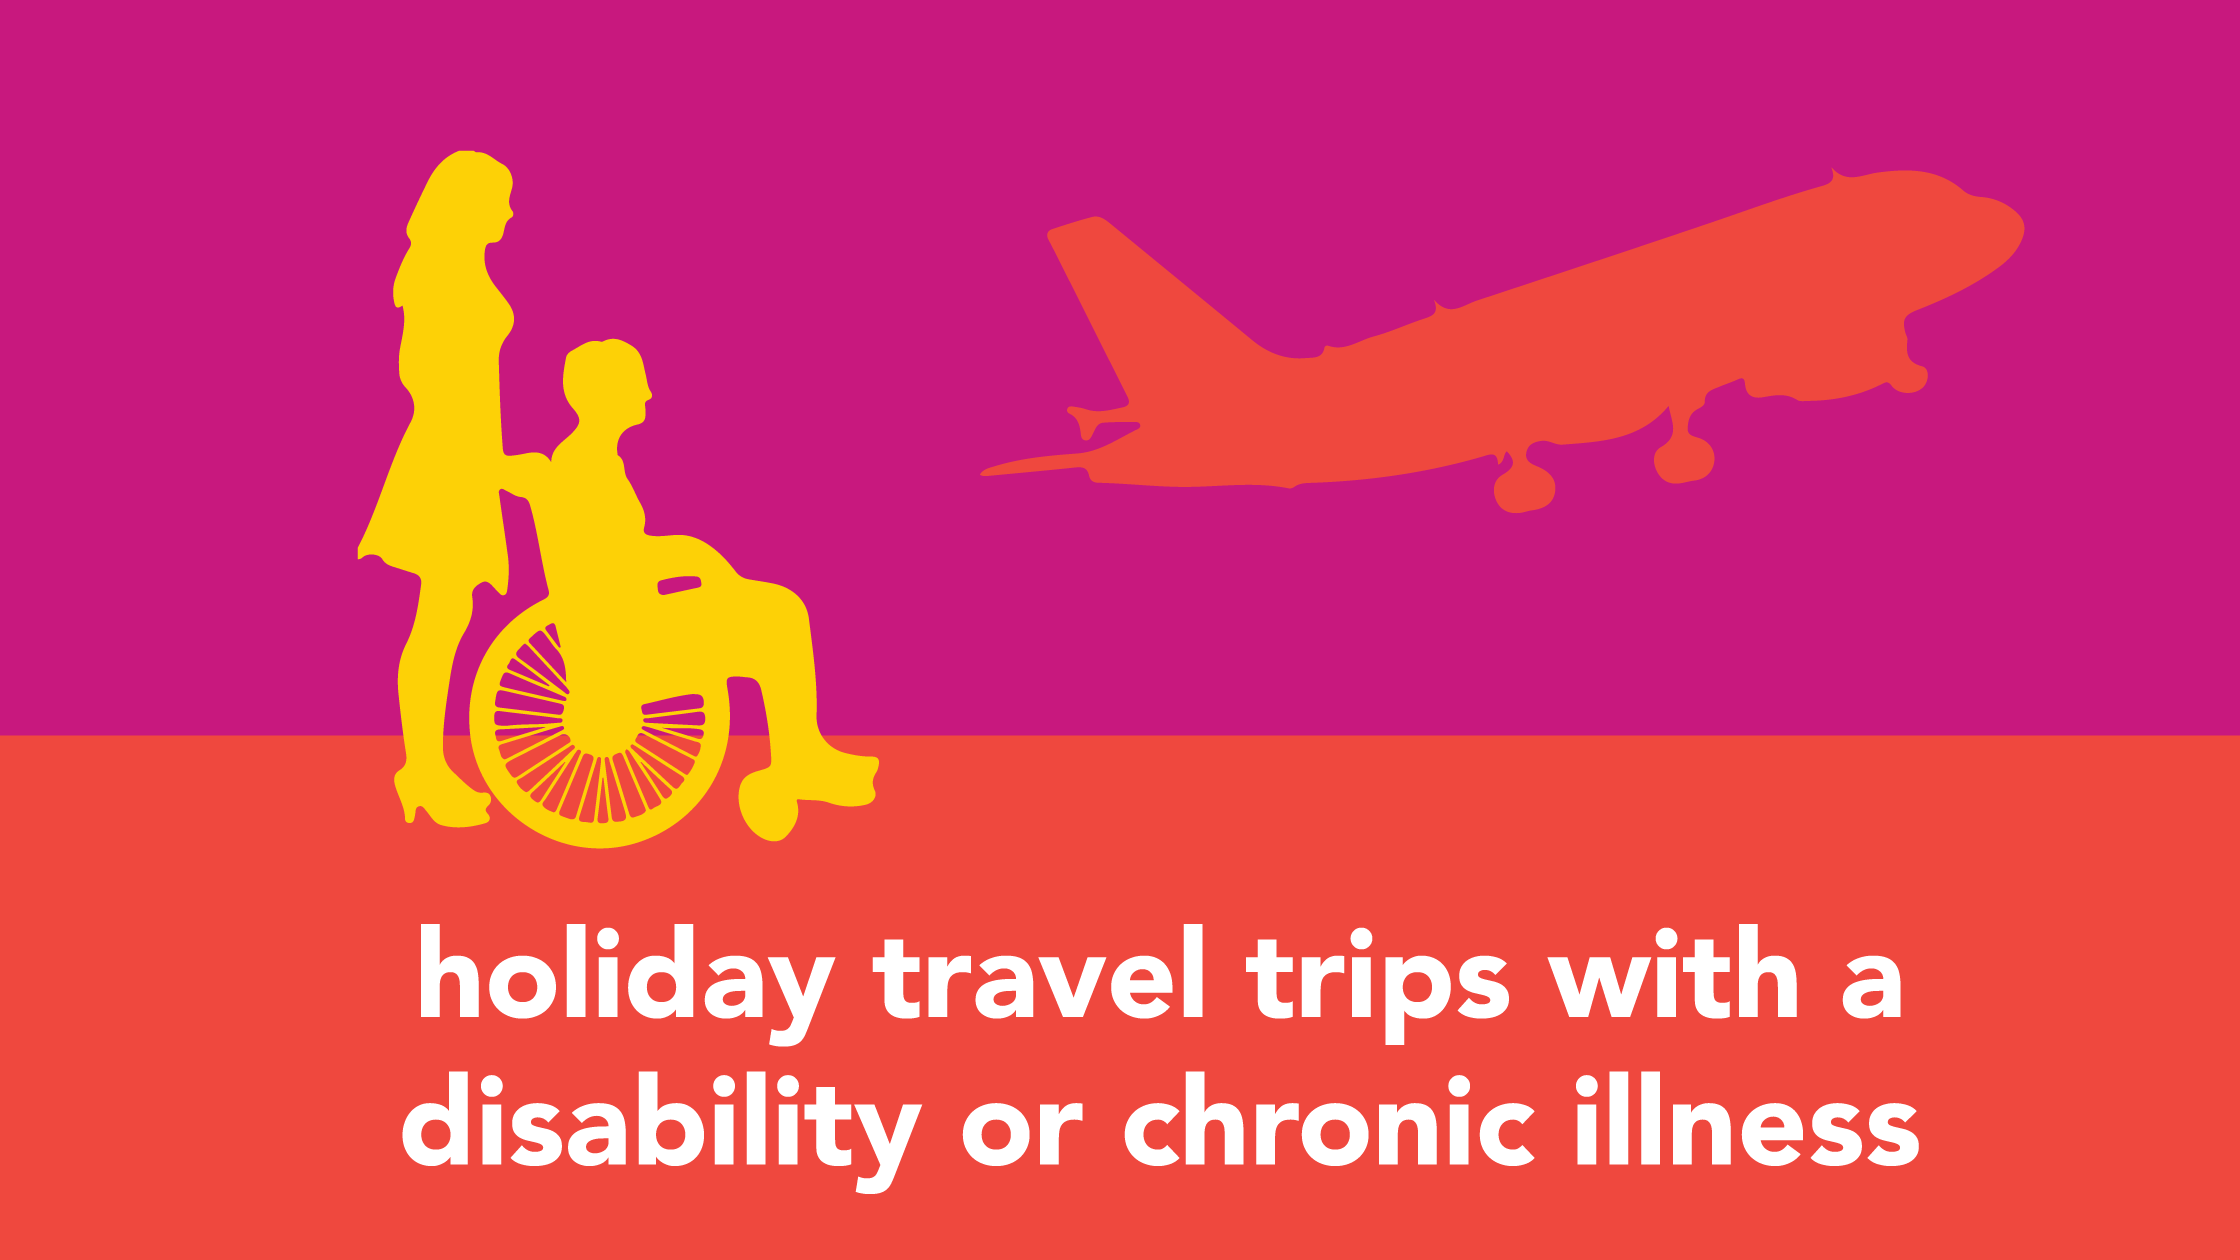 Holiday Travel Tips for Those with Disabilities or Chronic Illnesses